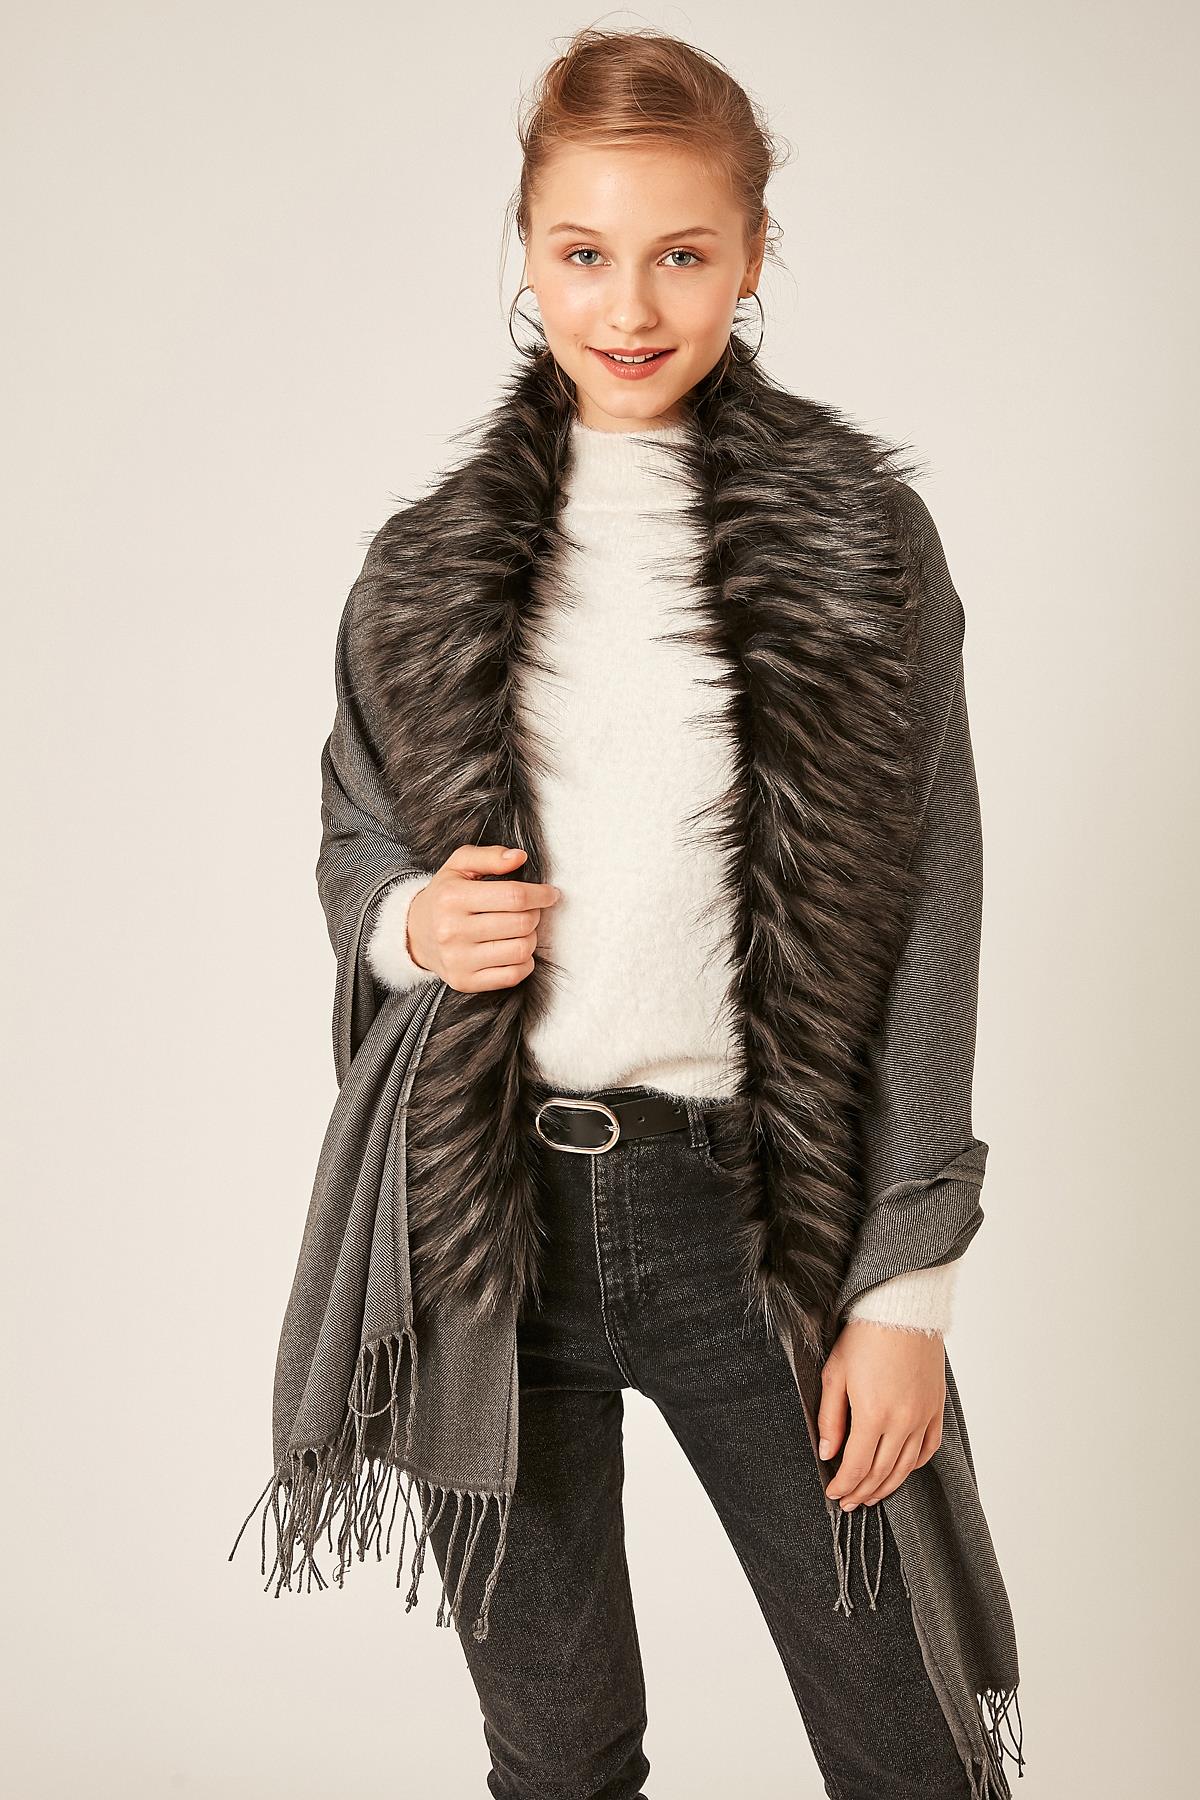 A wholesale clothing model wears Furry Tasseled Anthracite Poncho - Gray, Turkish wholesale Poncho of Axesoire